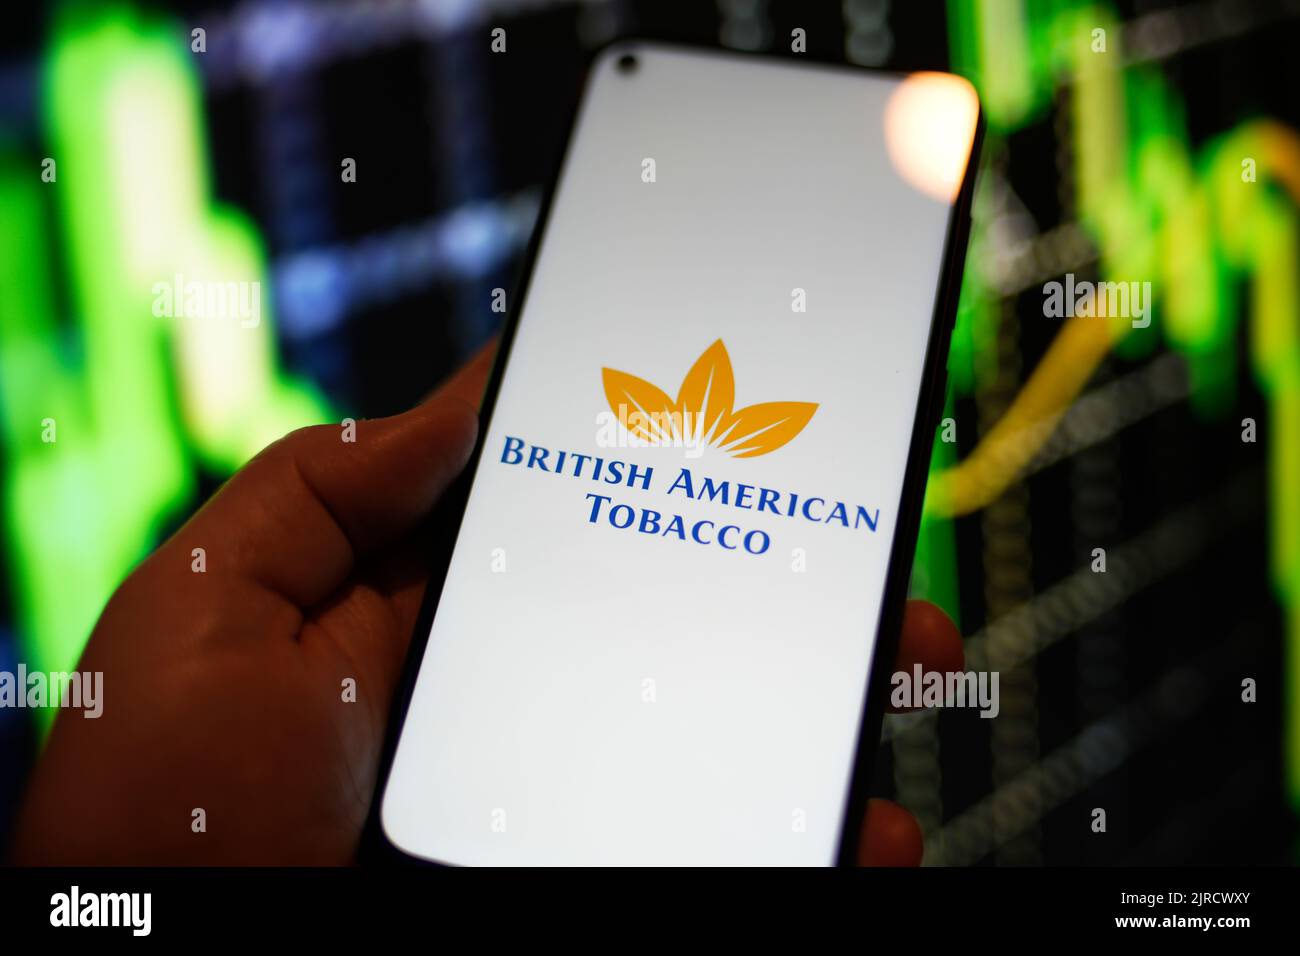 The British American Tobacco logo is seen on a Redmi phone screen in this photo illustration in Warsaw, Poland on 23 August, 2022. Stock Photo